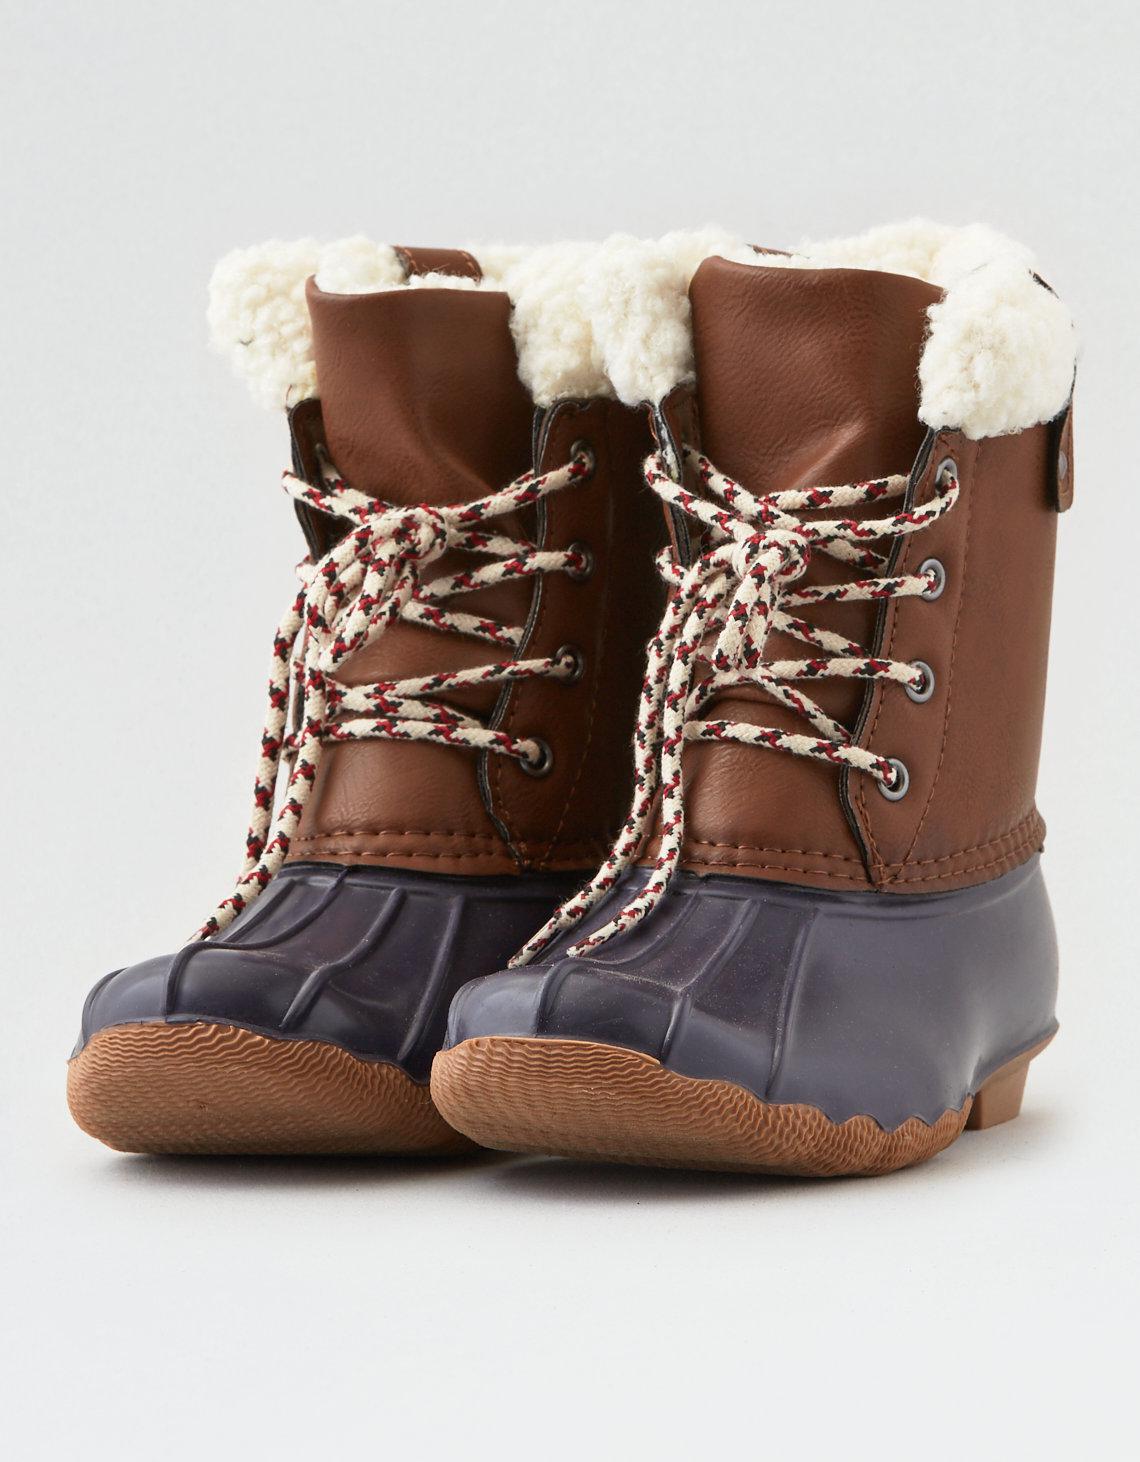 sherpa duck boots